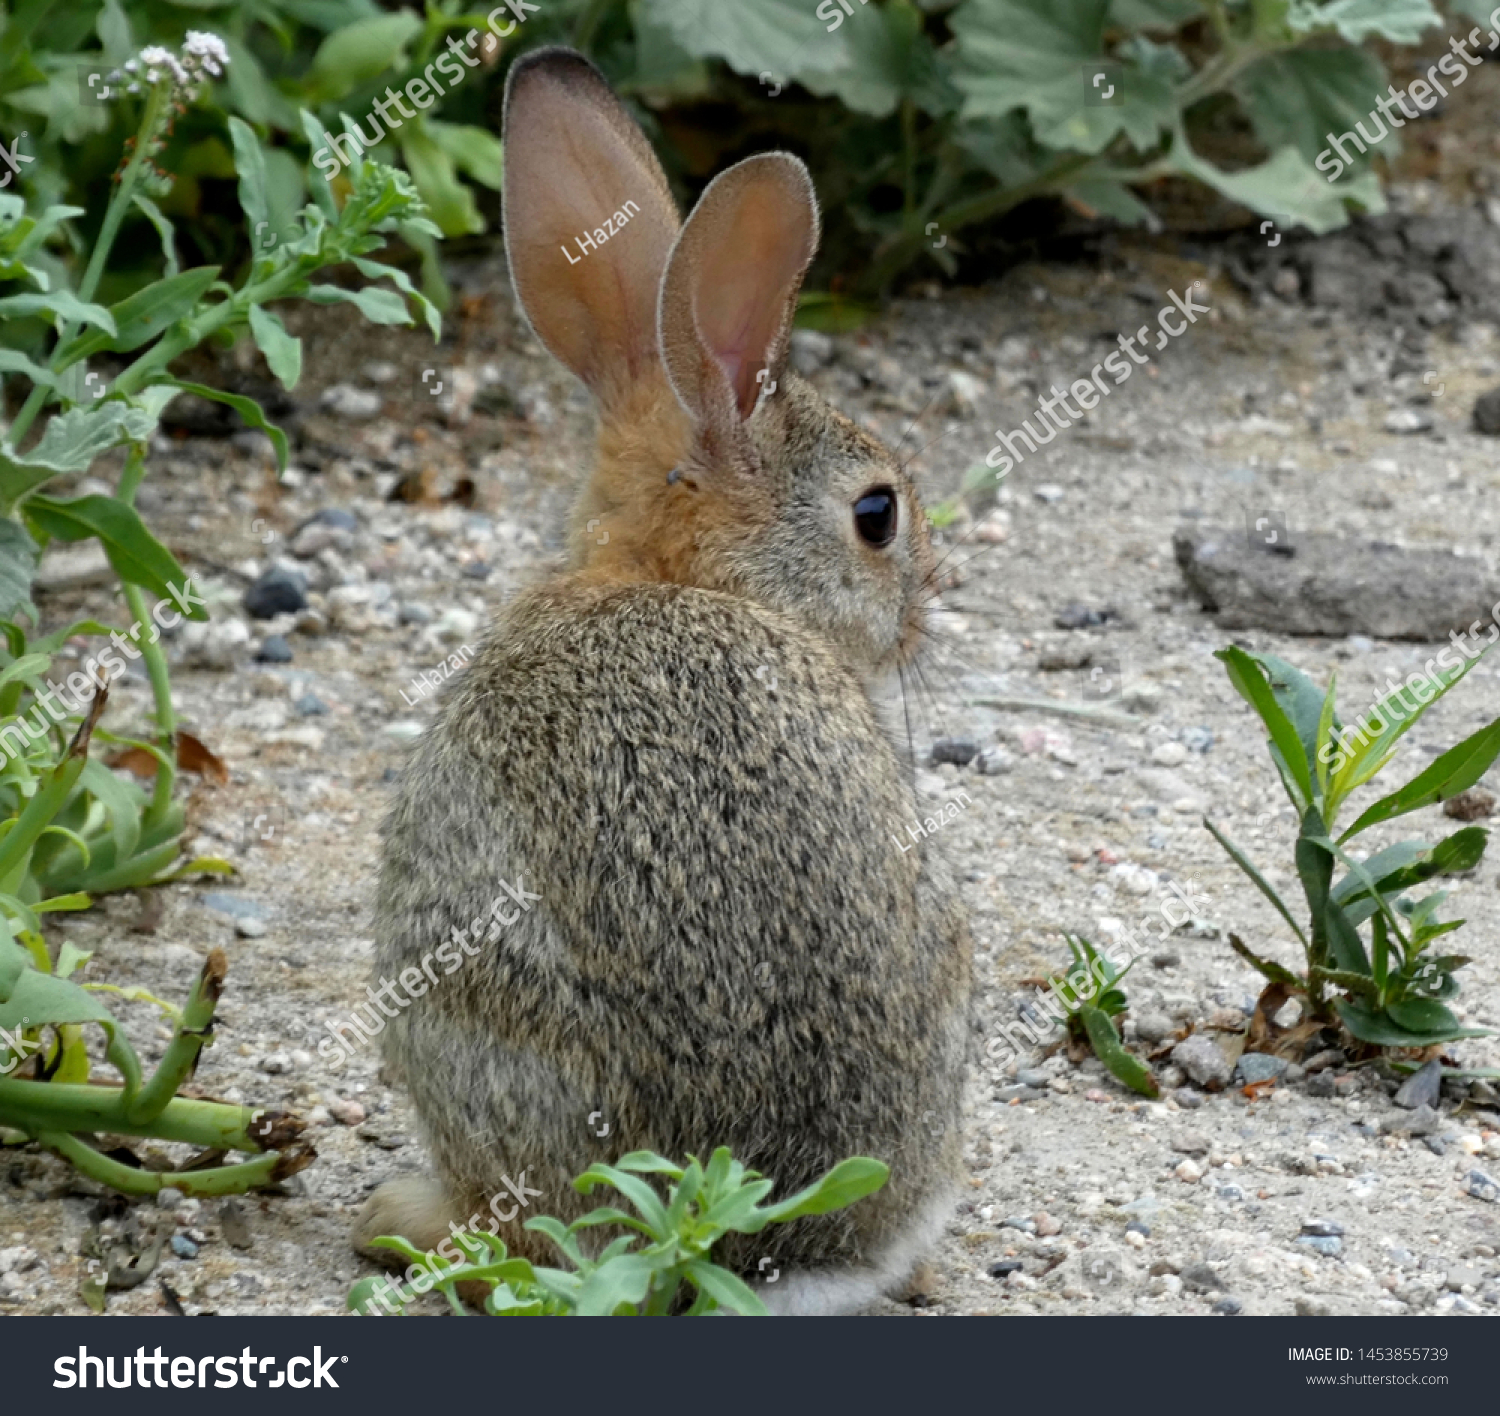 The southern bunny